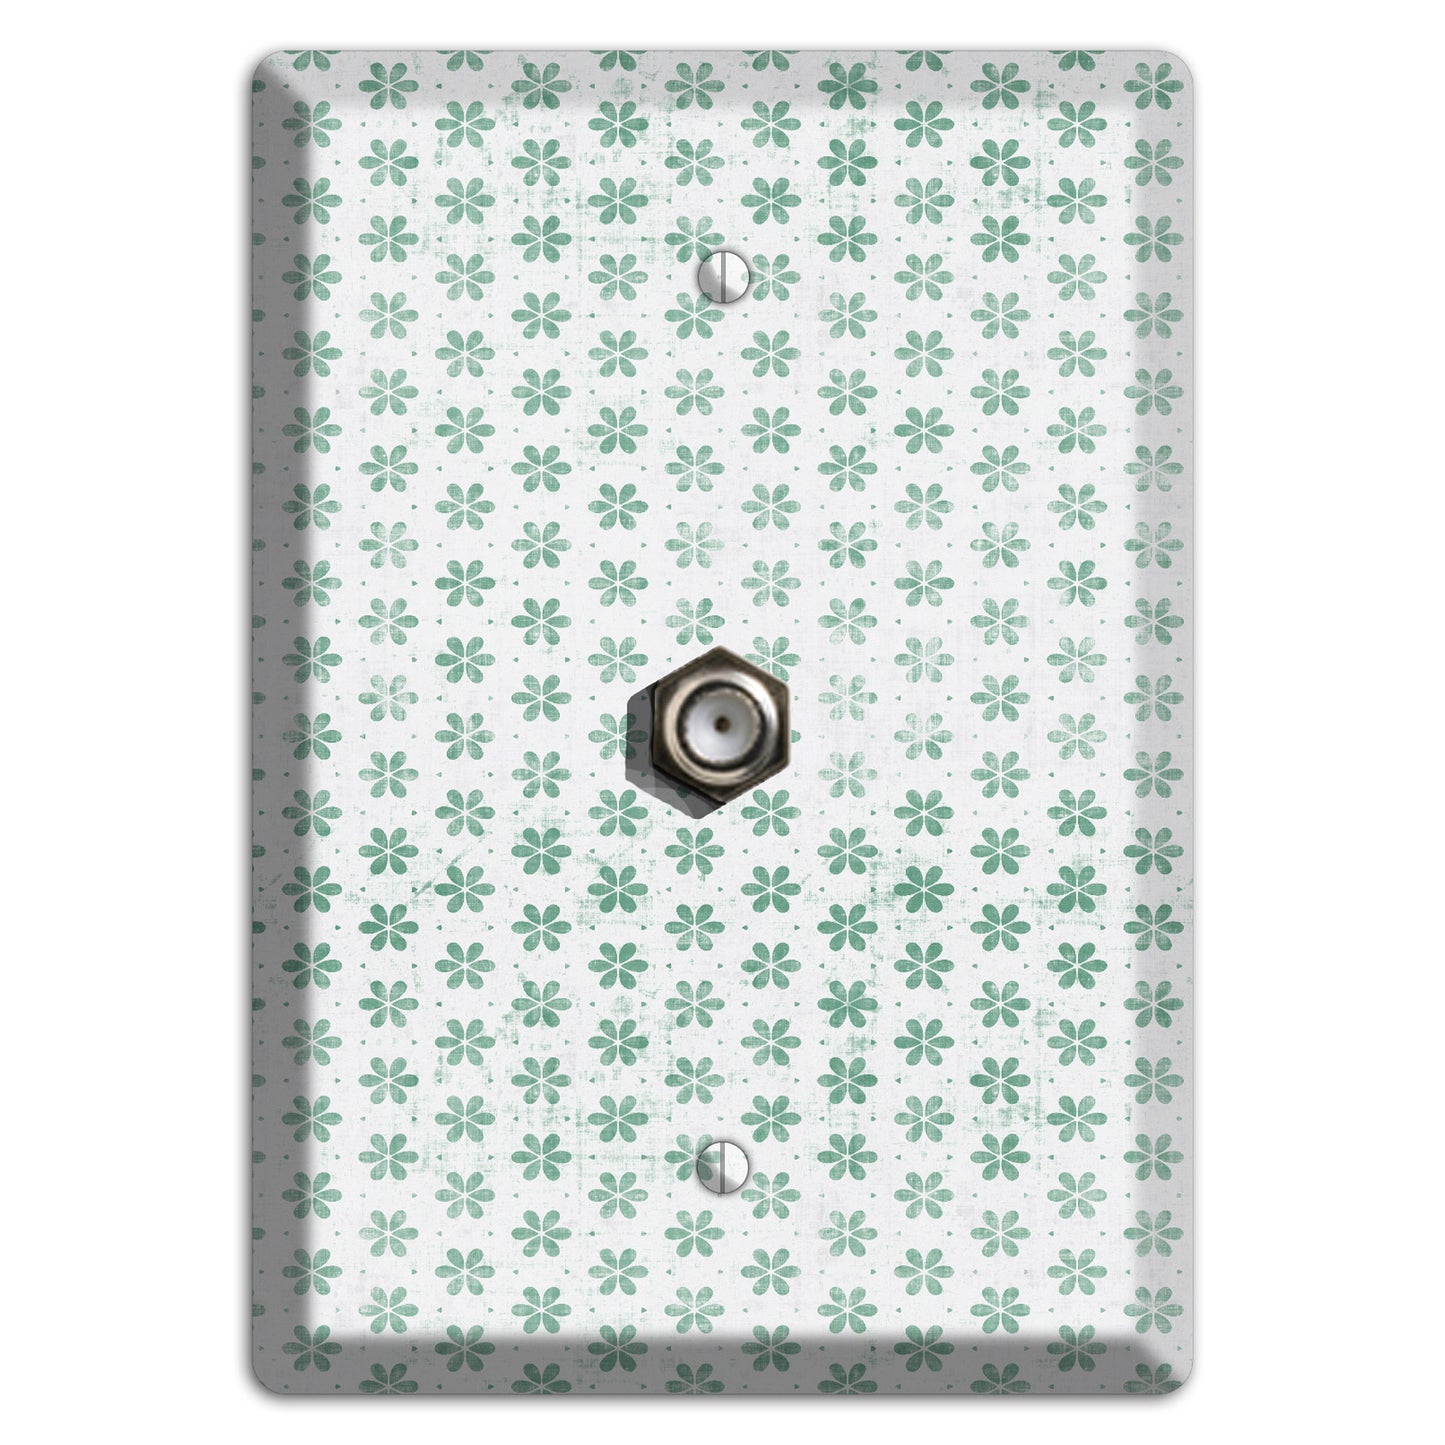 White with Green Grunge Floral Contour Cable Wallplate